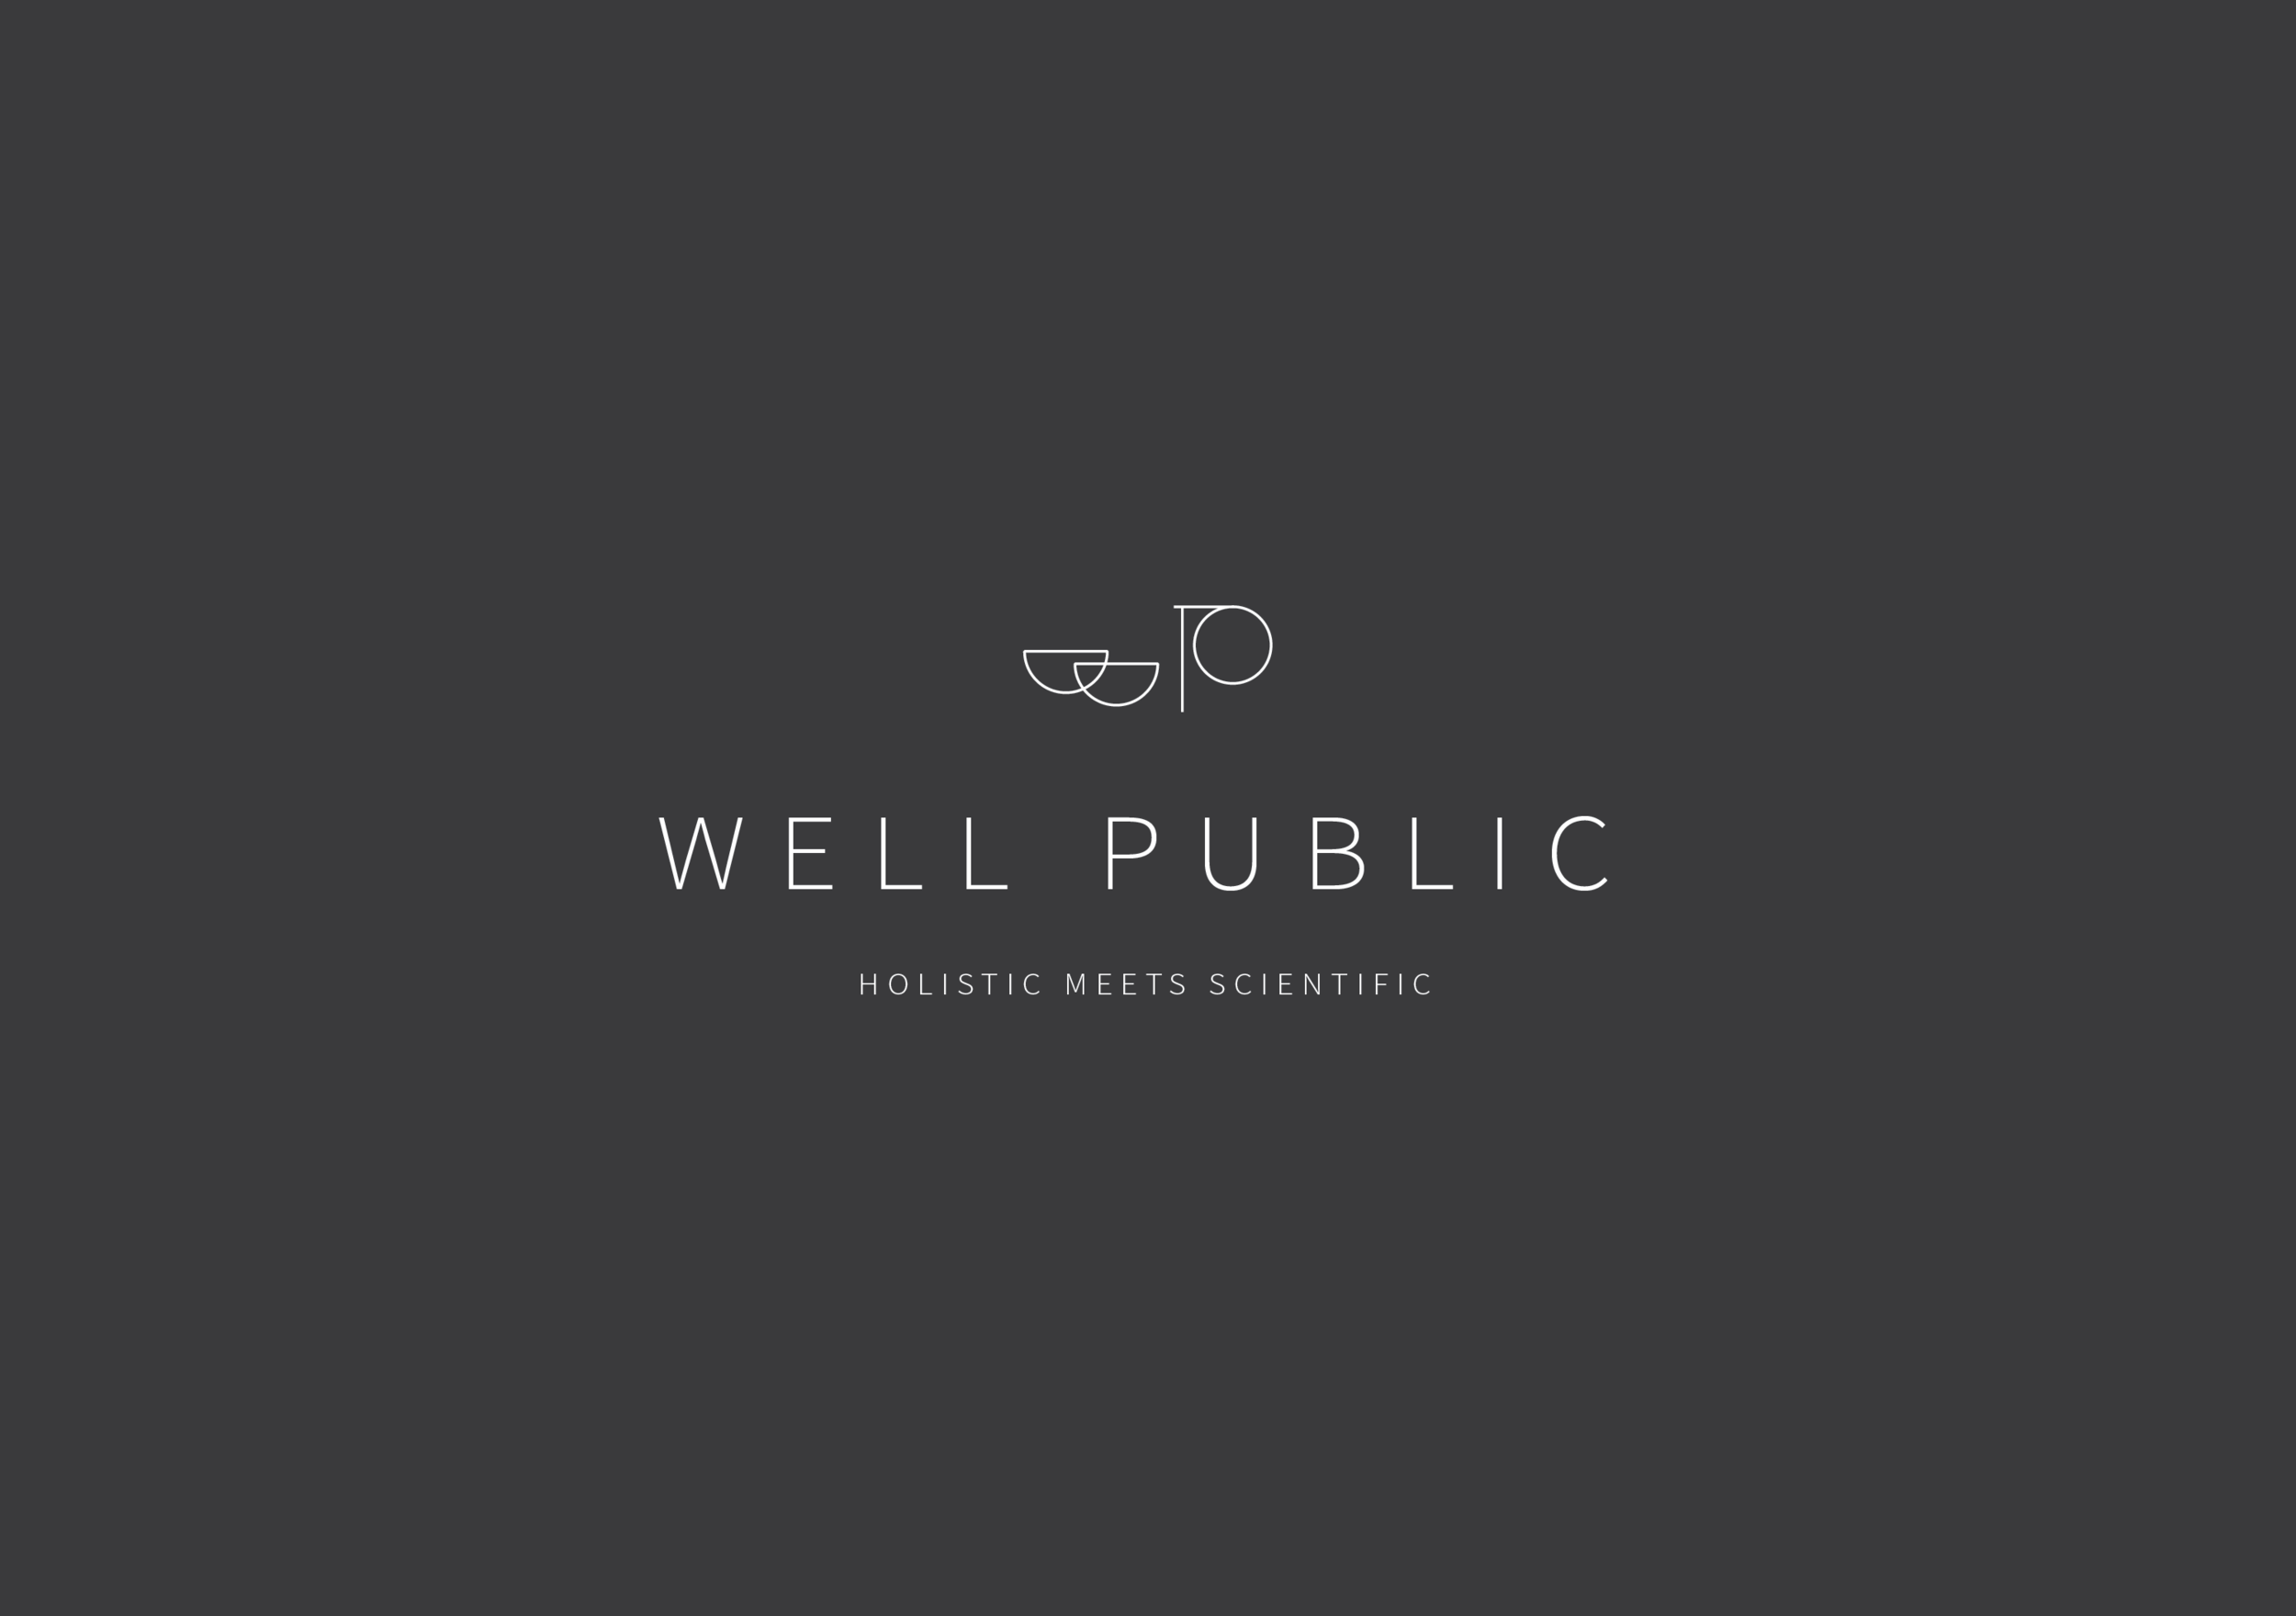 Andrea-Crouse-Design-Well-Public-1.png